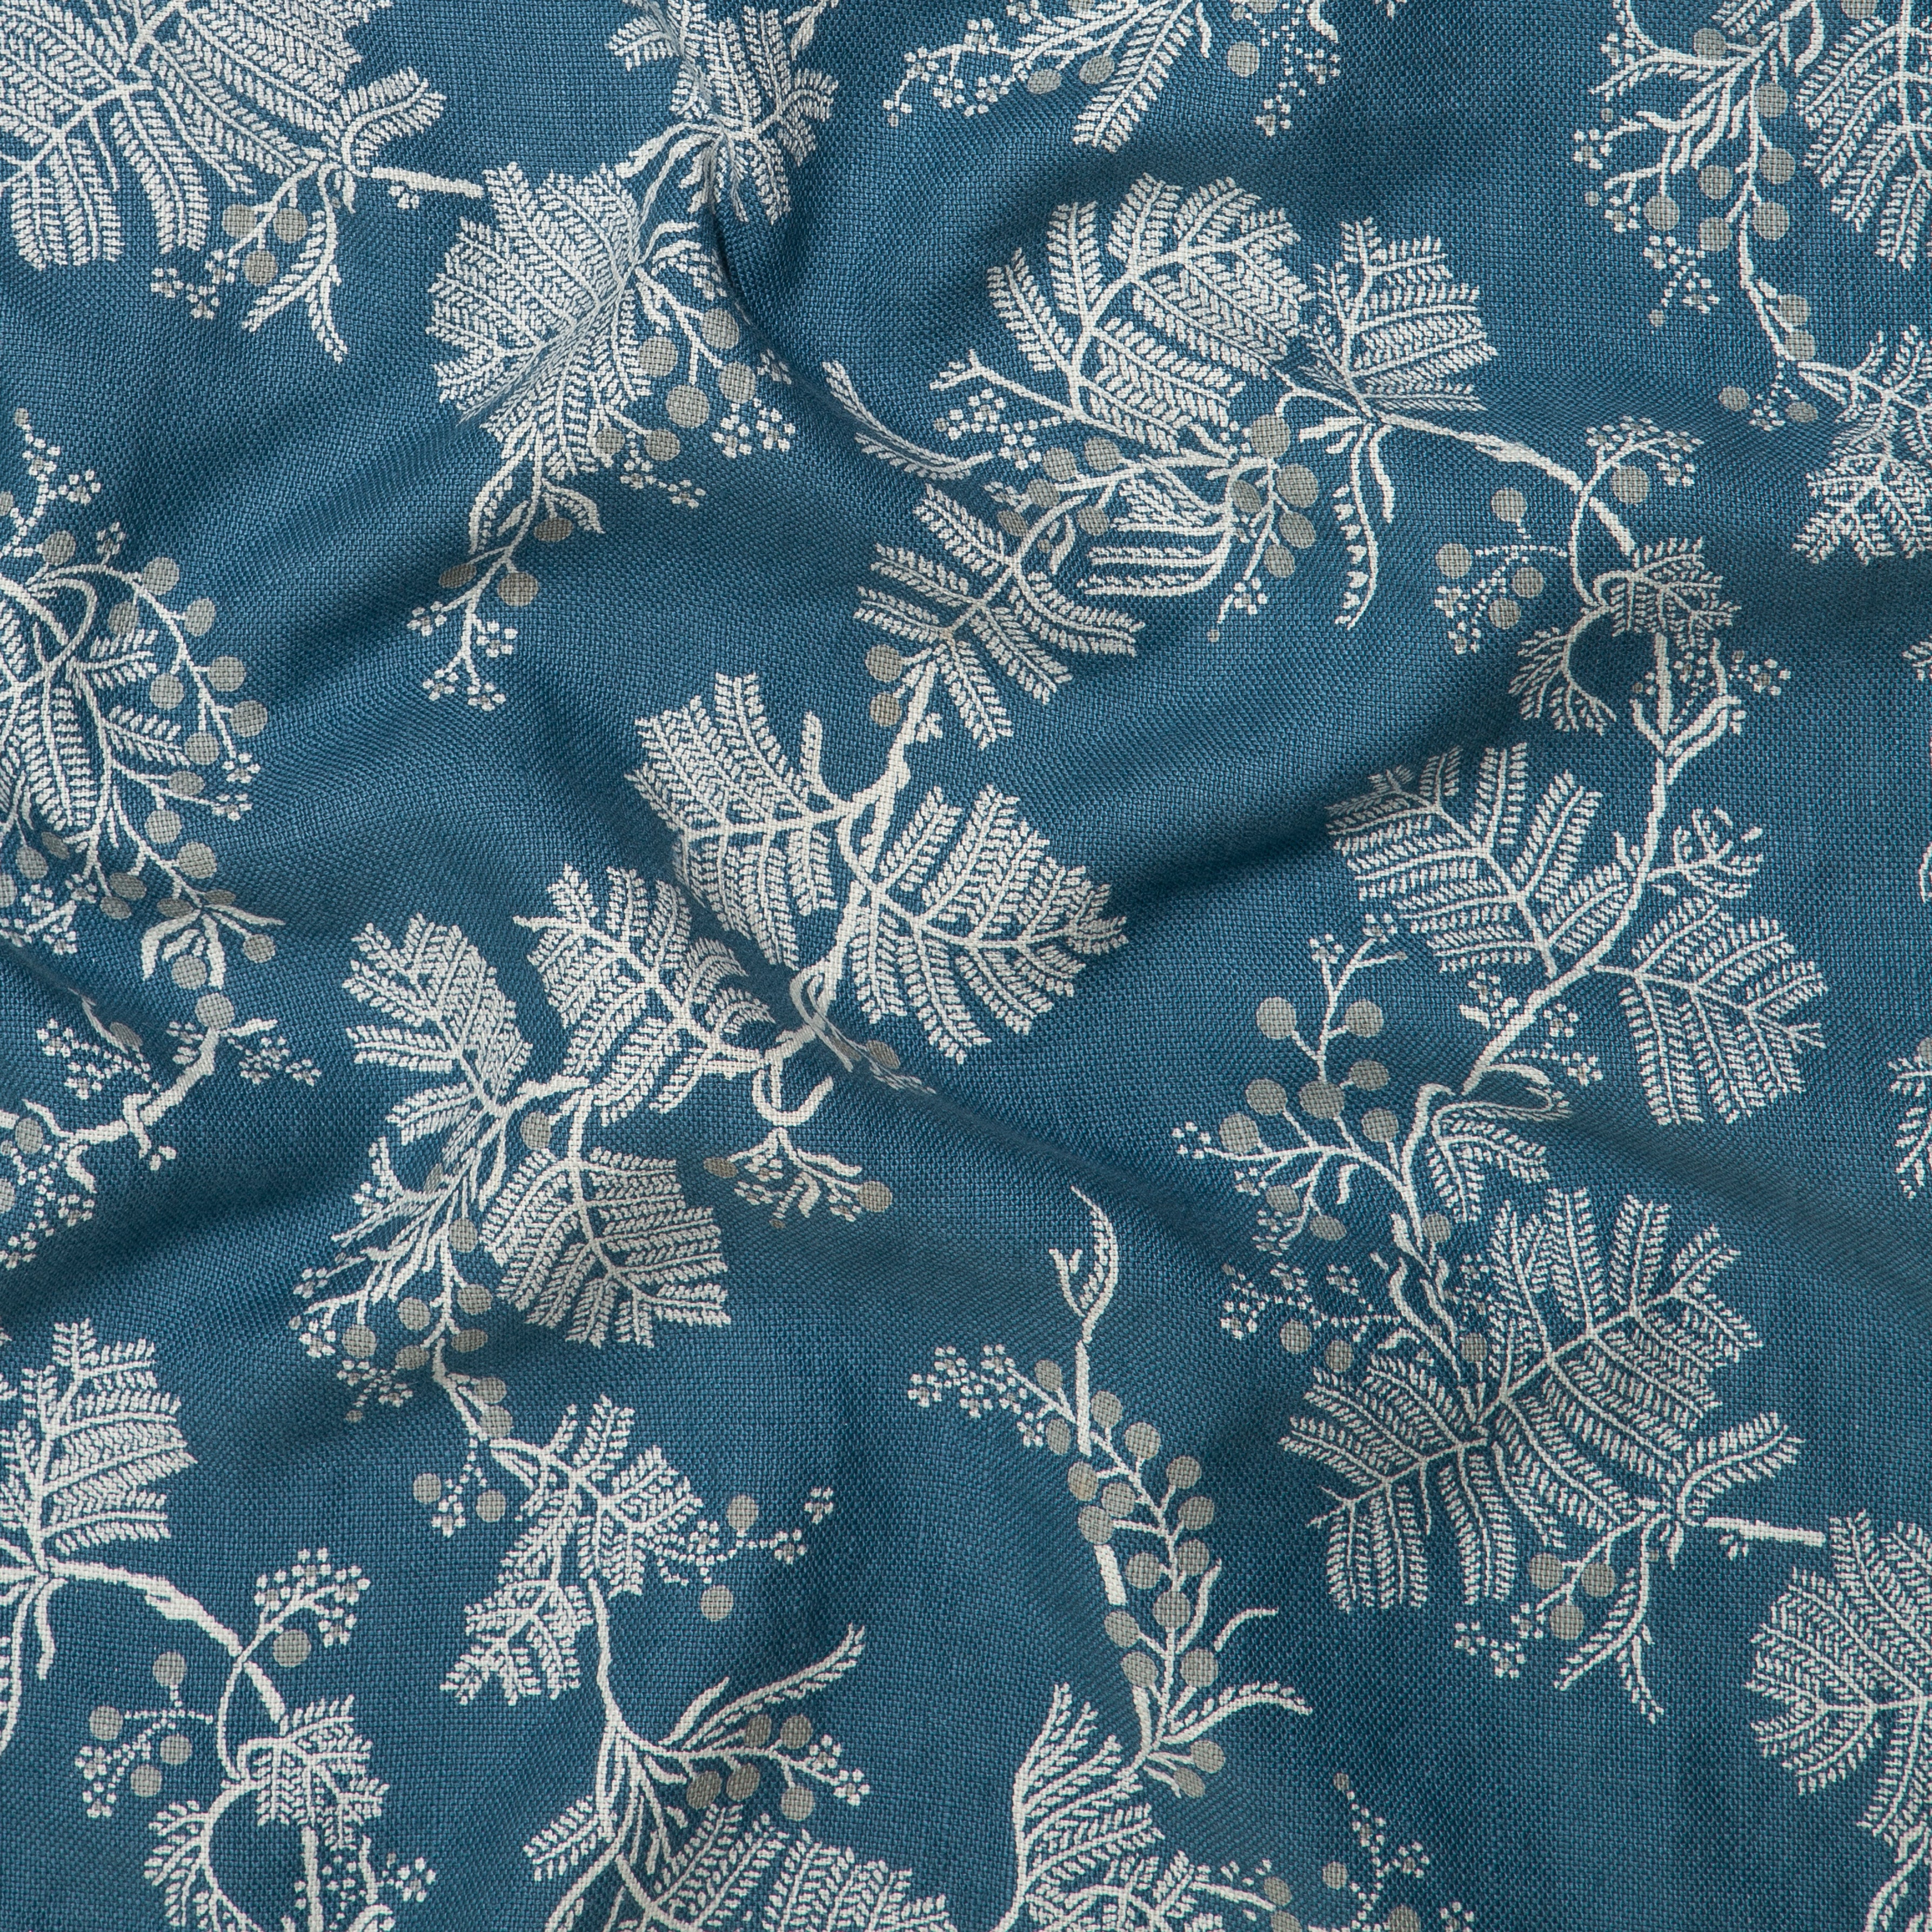 Draped fabric in a leaf and bud print in white and gray on a navy field.